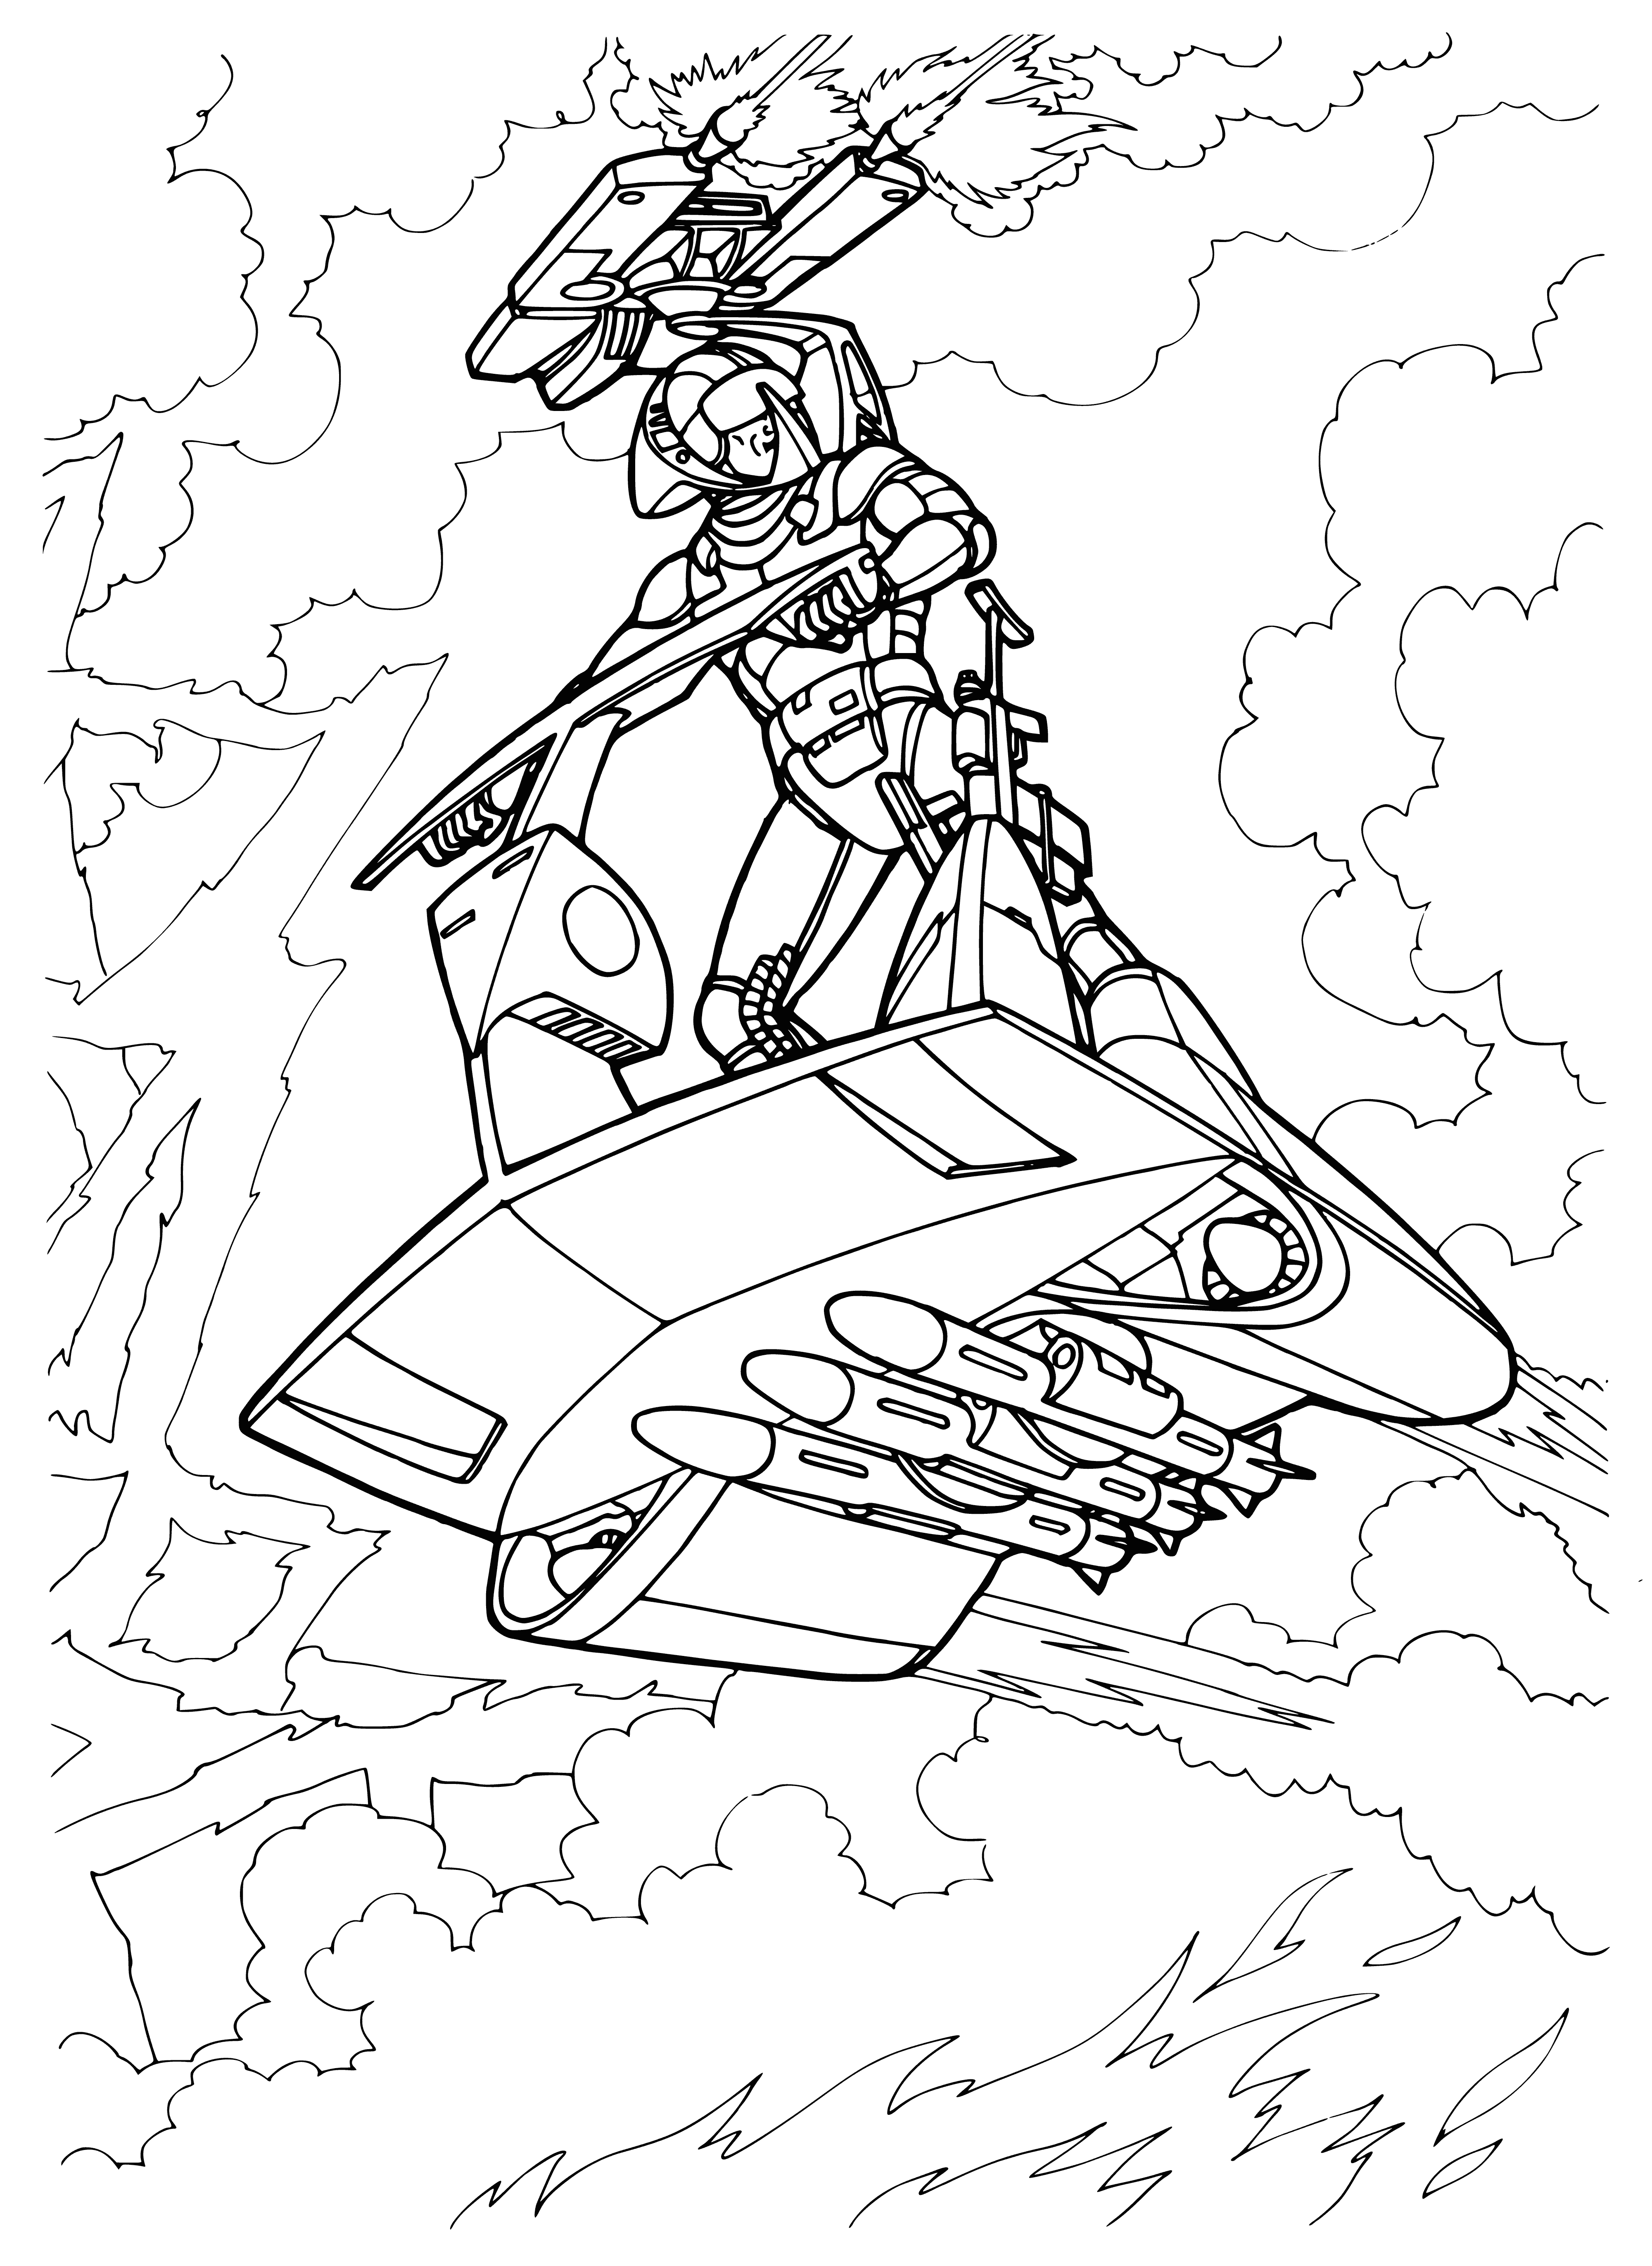 coloring page: Soldiers fight w/ advanced tech & hand-to-hand combat. High-tech weapons used to battle through a city, while another soldier fights up close with a knife.